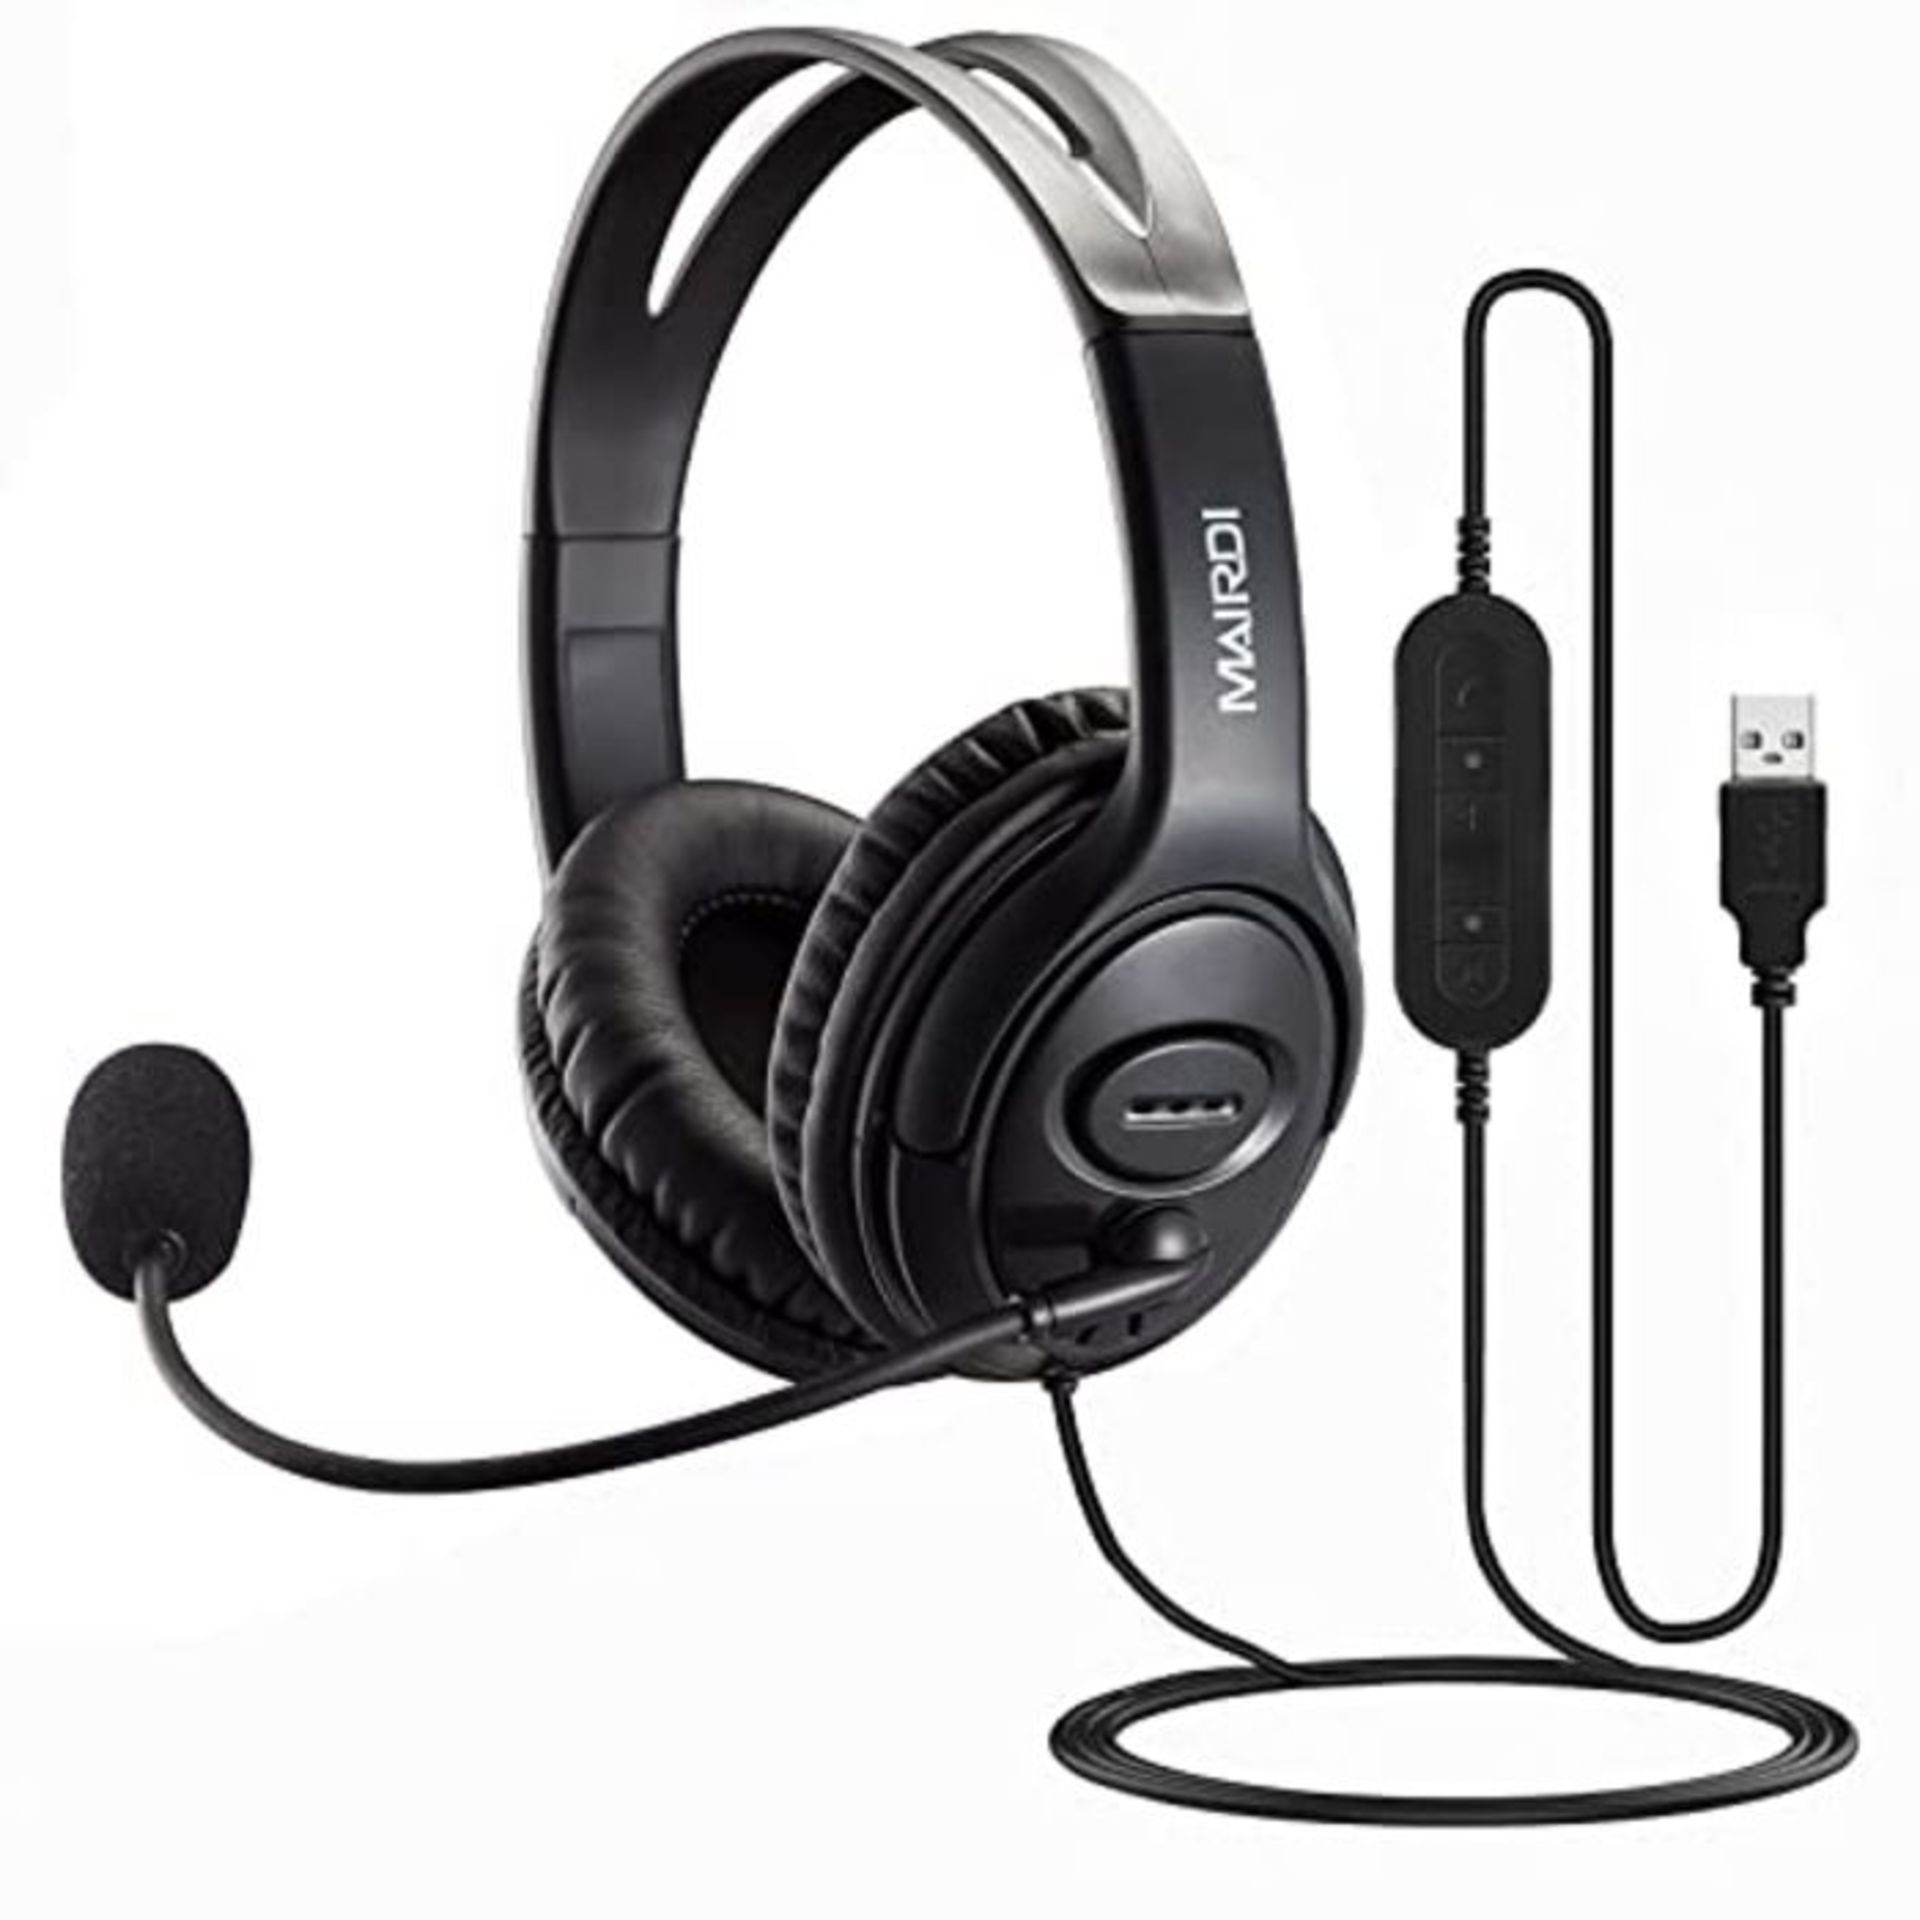 USB Headset with Noise Cancelling Microphone for Office Call Center Skype Teams Busine